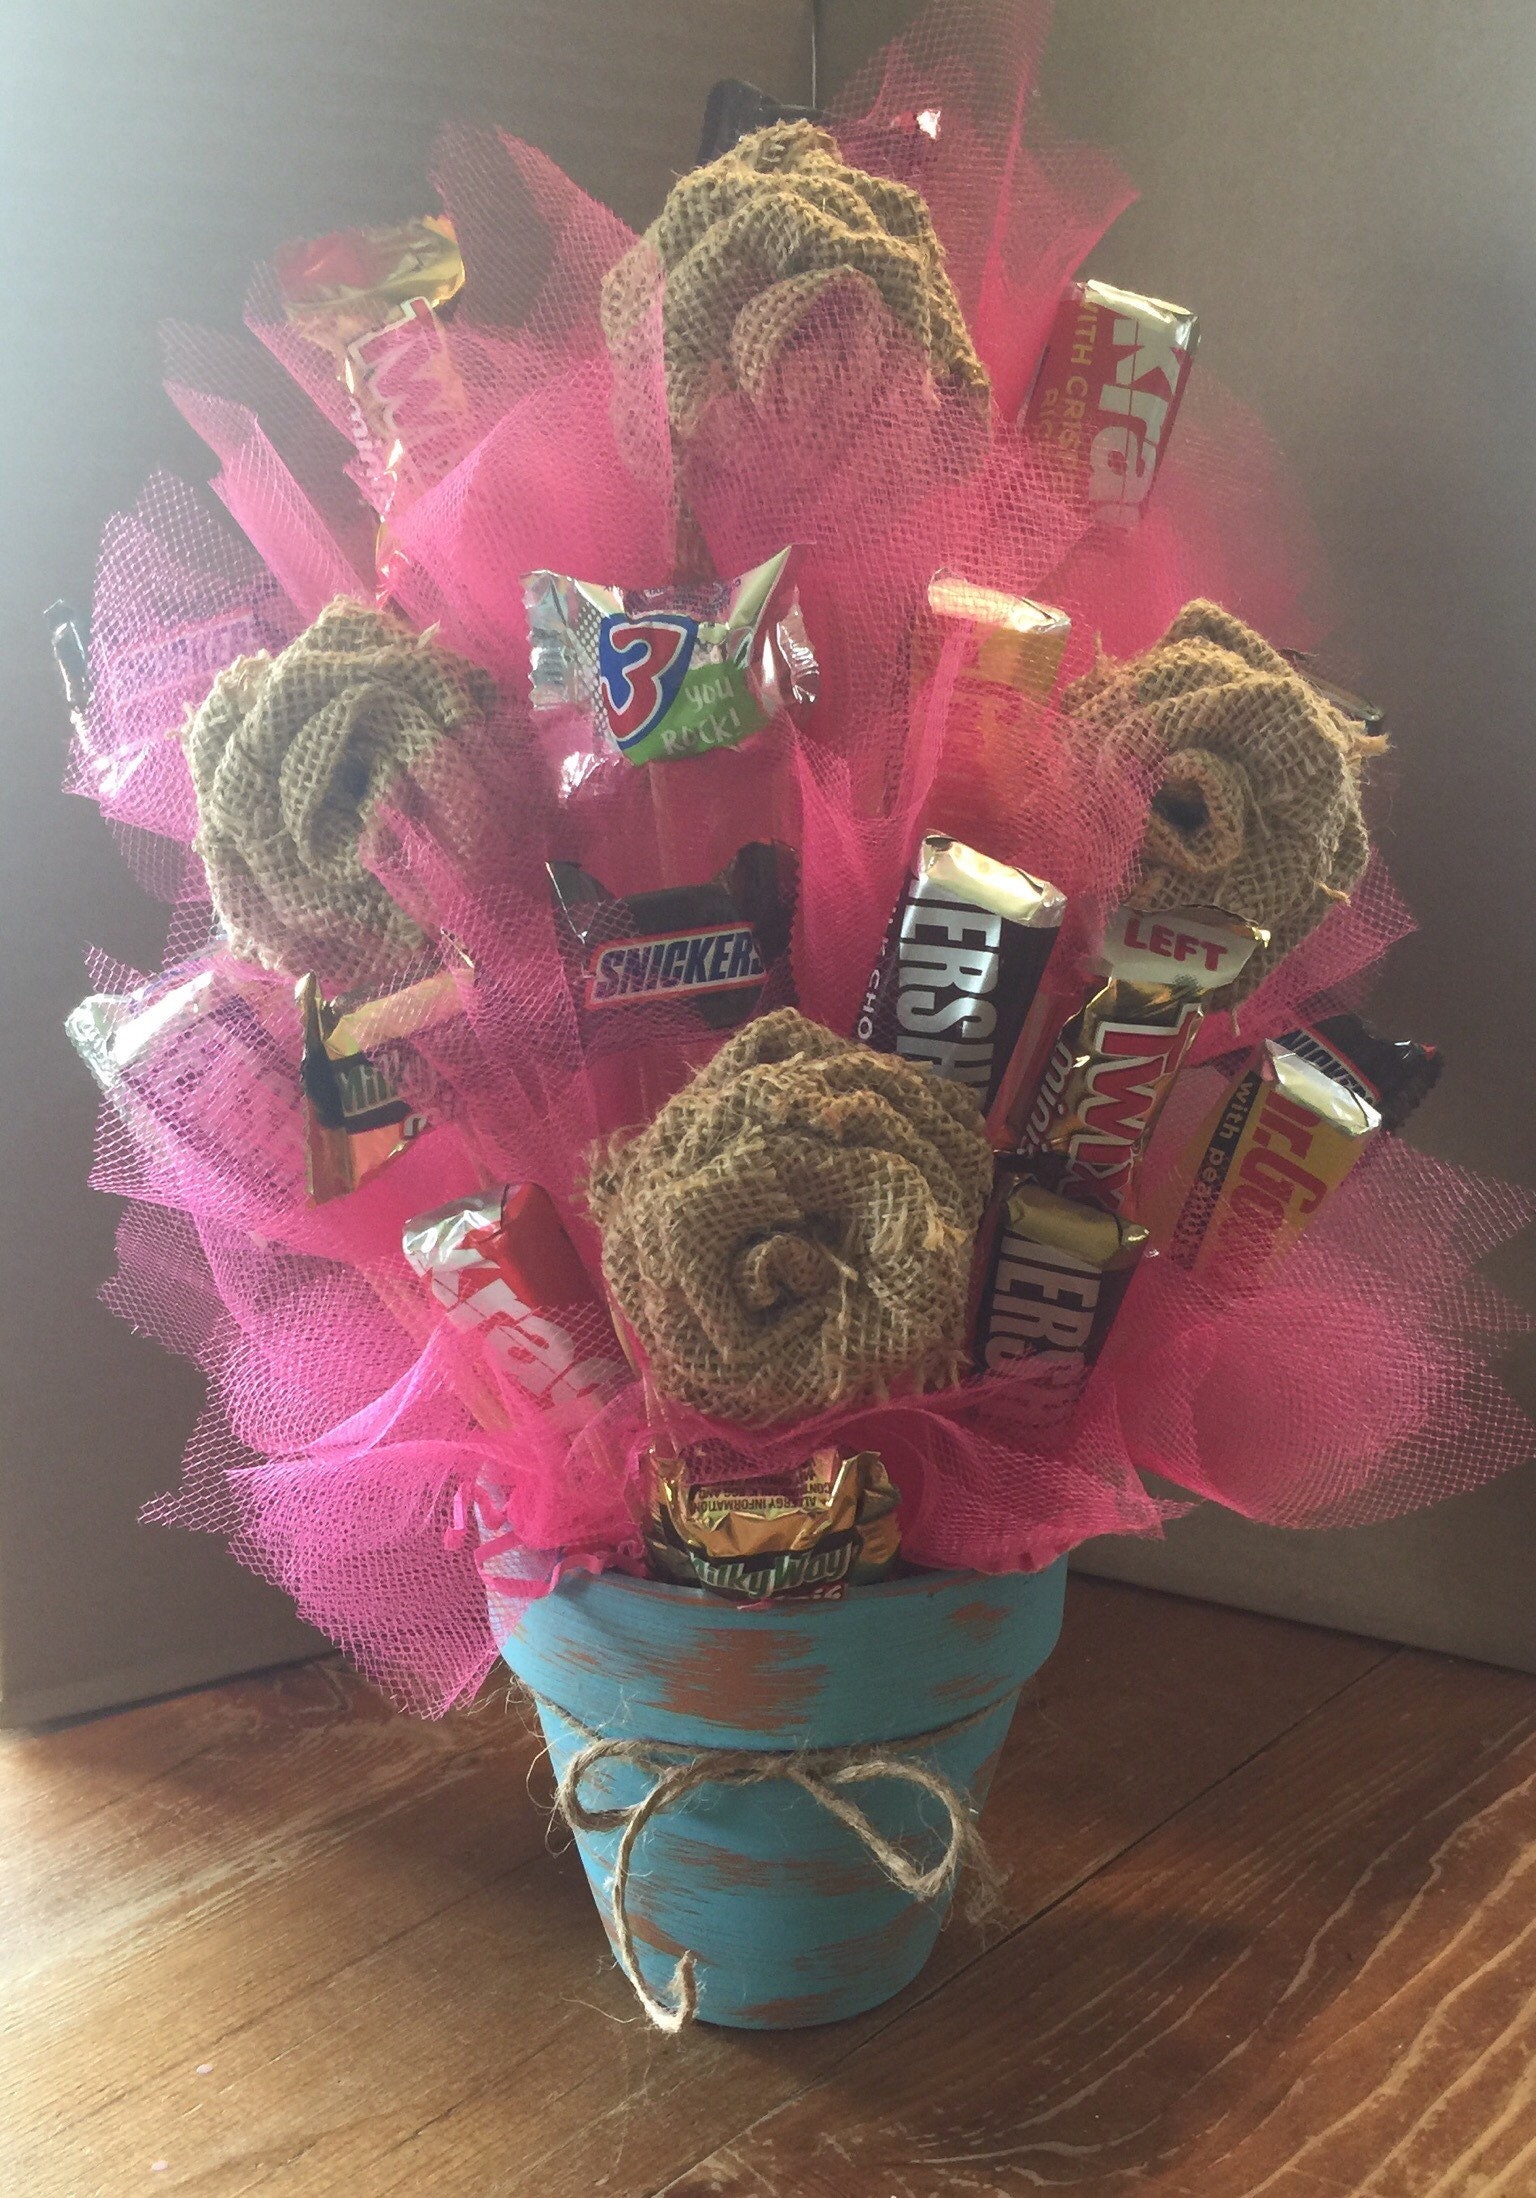 Flower Pot Candy Bouquet - One Hundred Dollars a Month